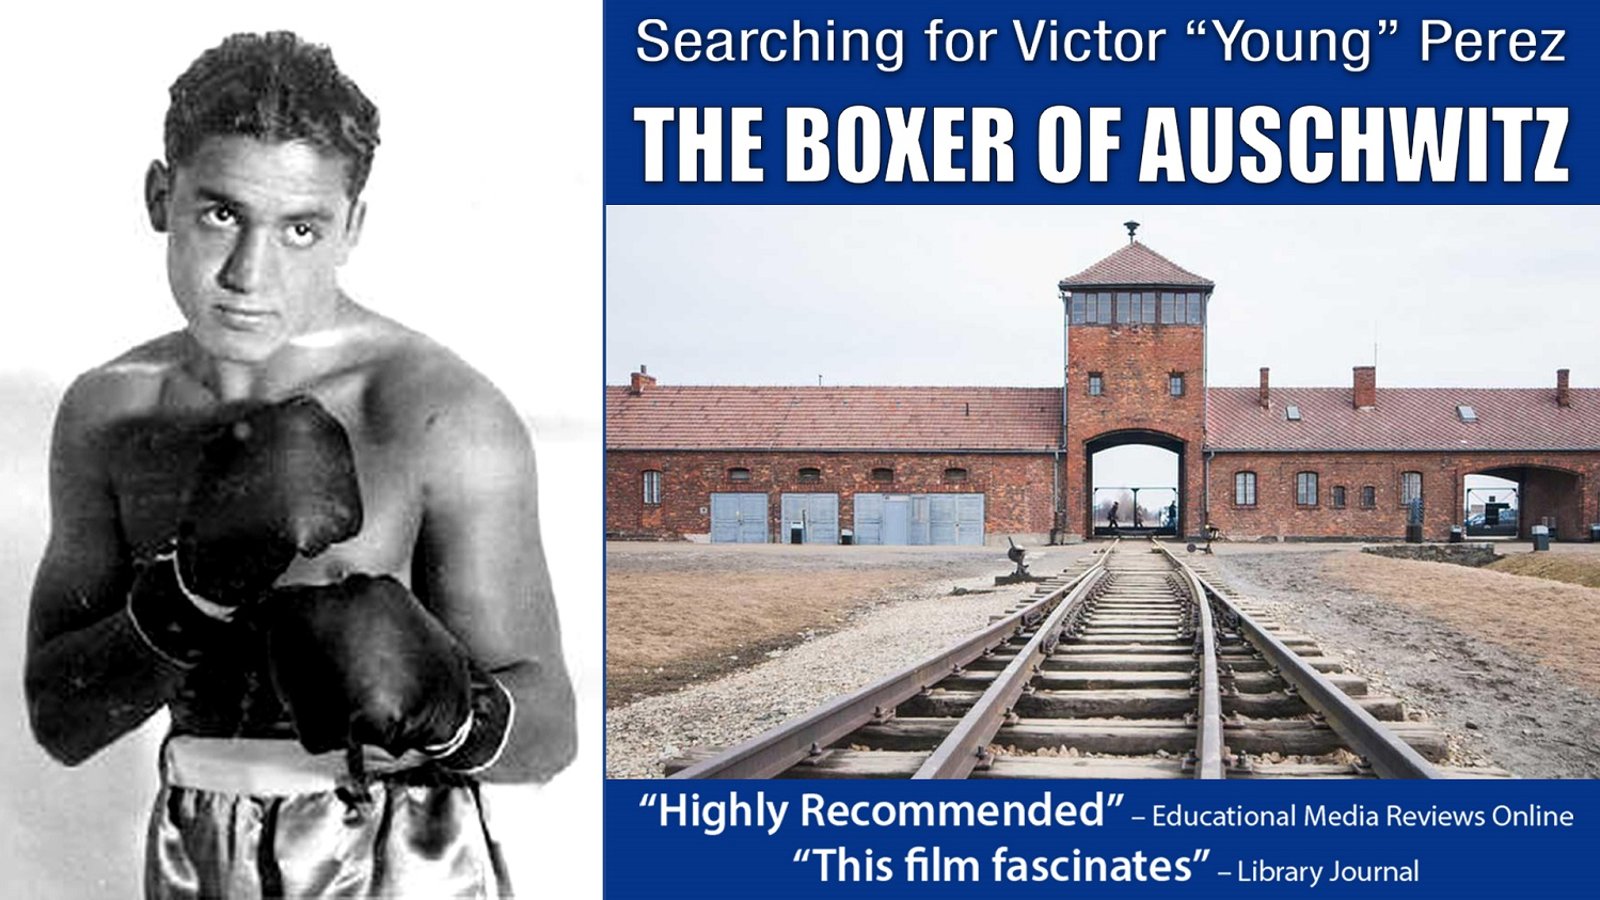 Searching for Victor “Young” Perez - The Boxer of Auschwitz